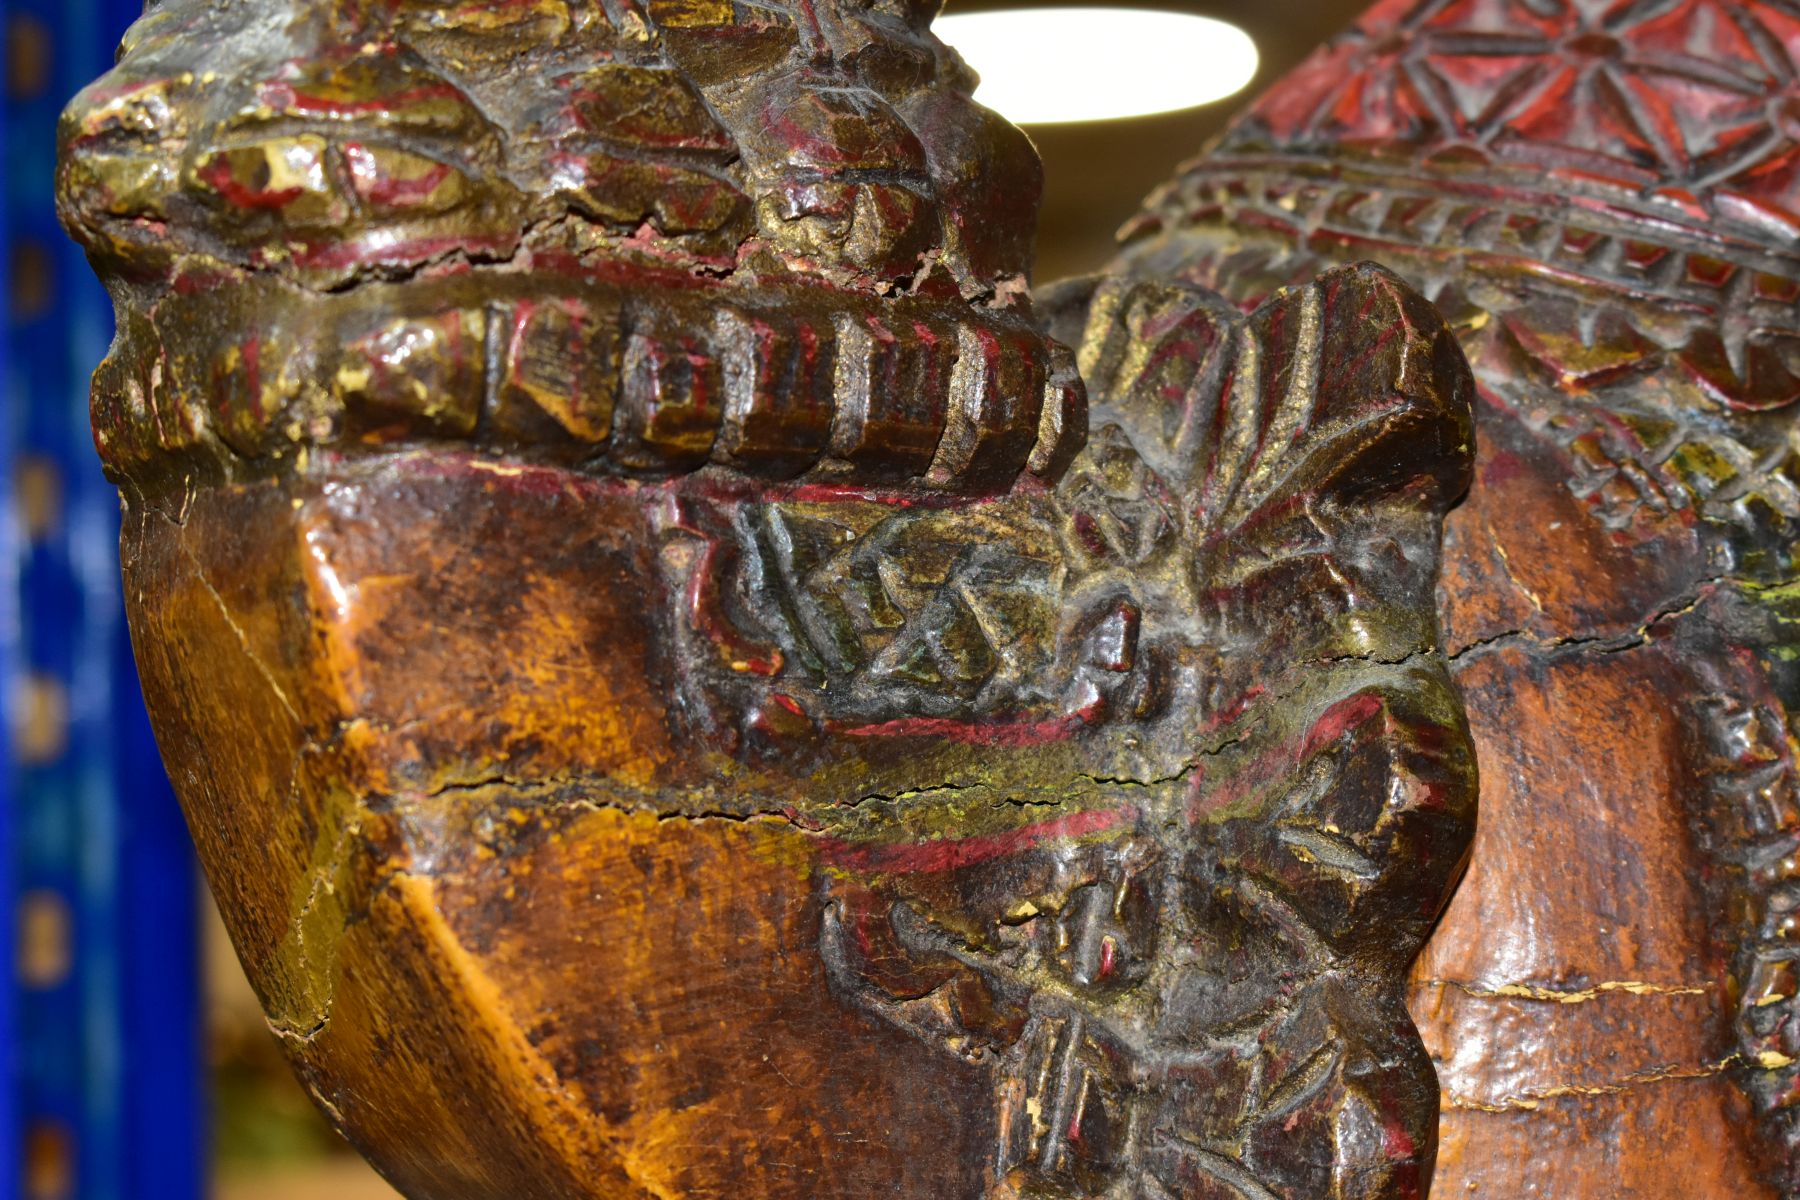 A LARGE WOODEN CARVED CAMEL WITH RIDERS, with carved and painted details, it may depict the - Image 8 of 9